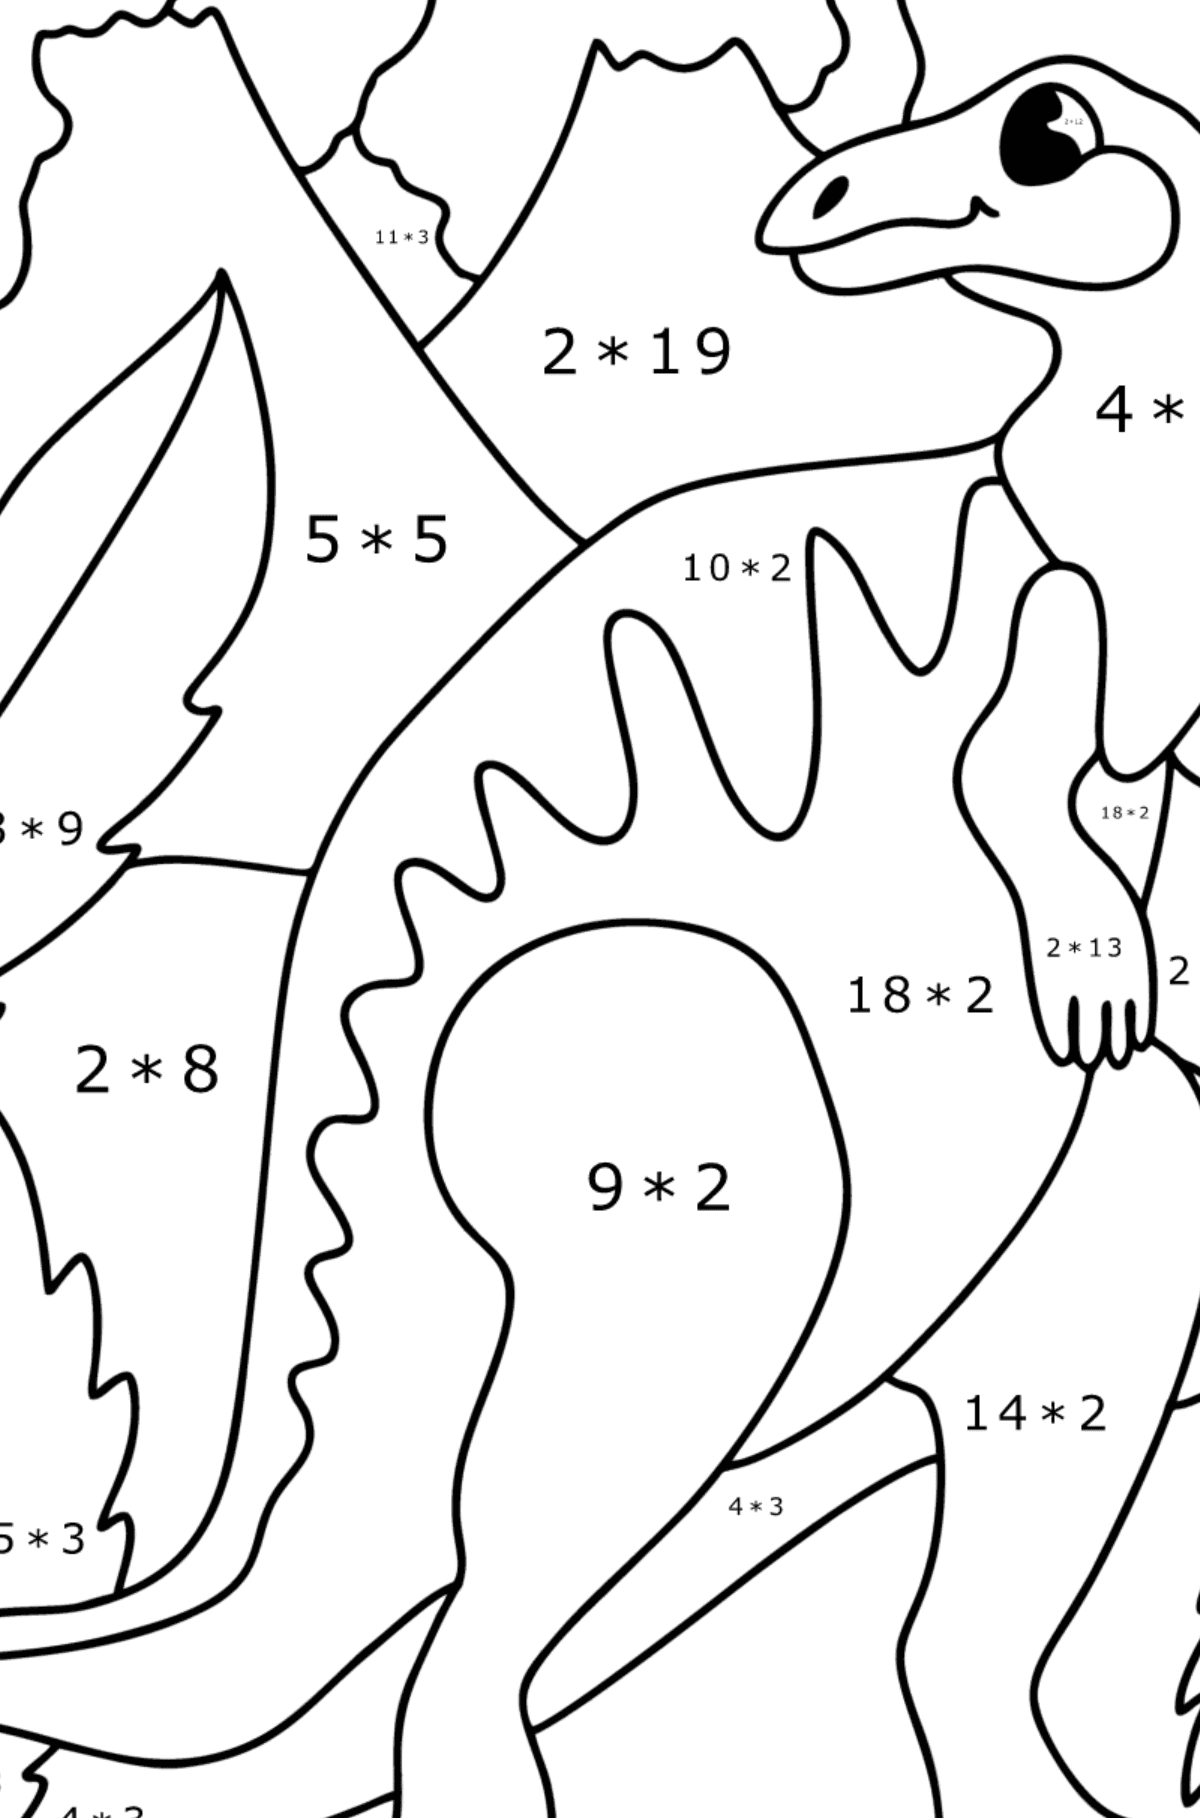 Hadrosaur coloring page - Math Coloring - Multiplication for Kids